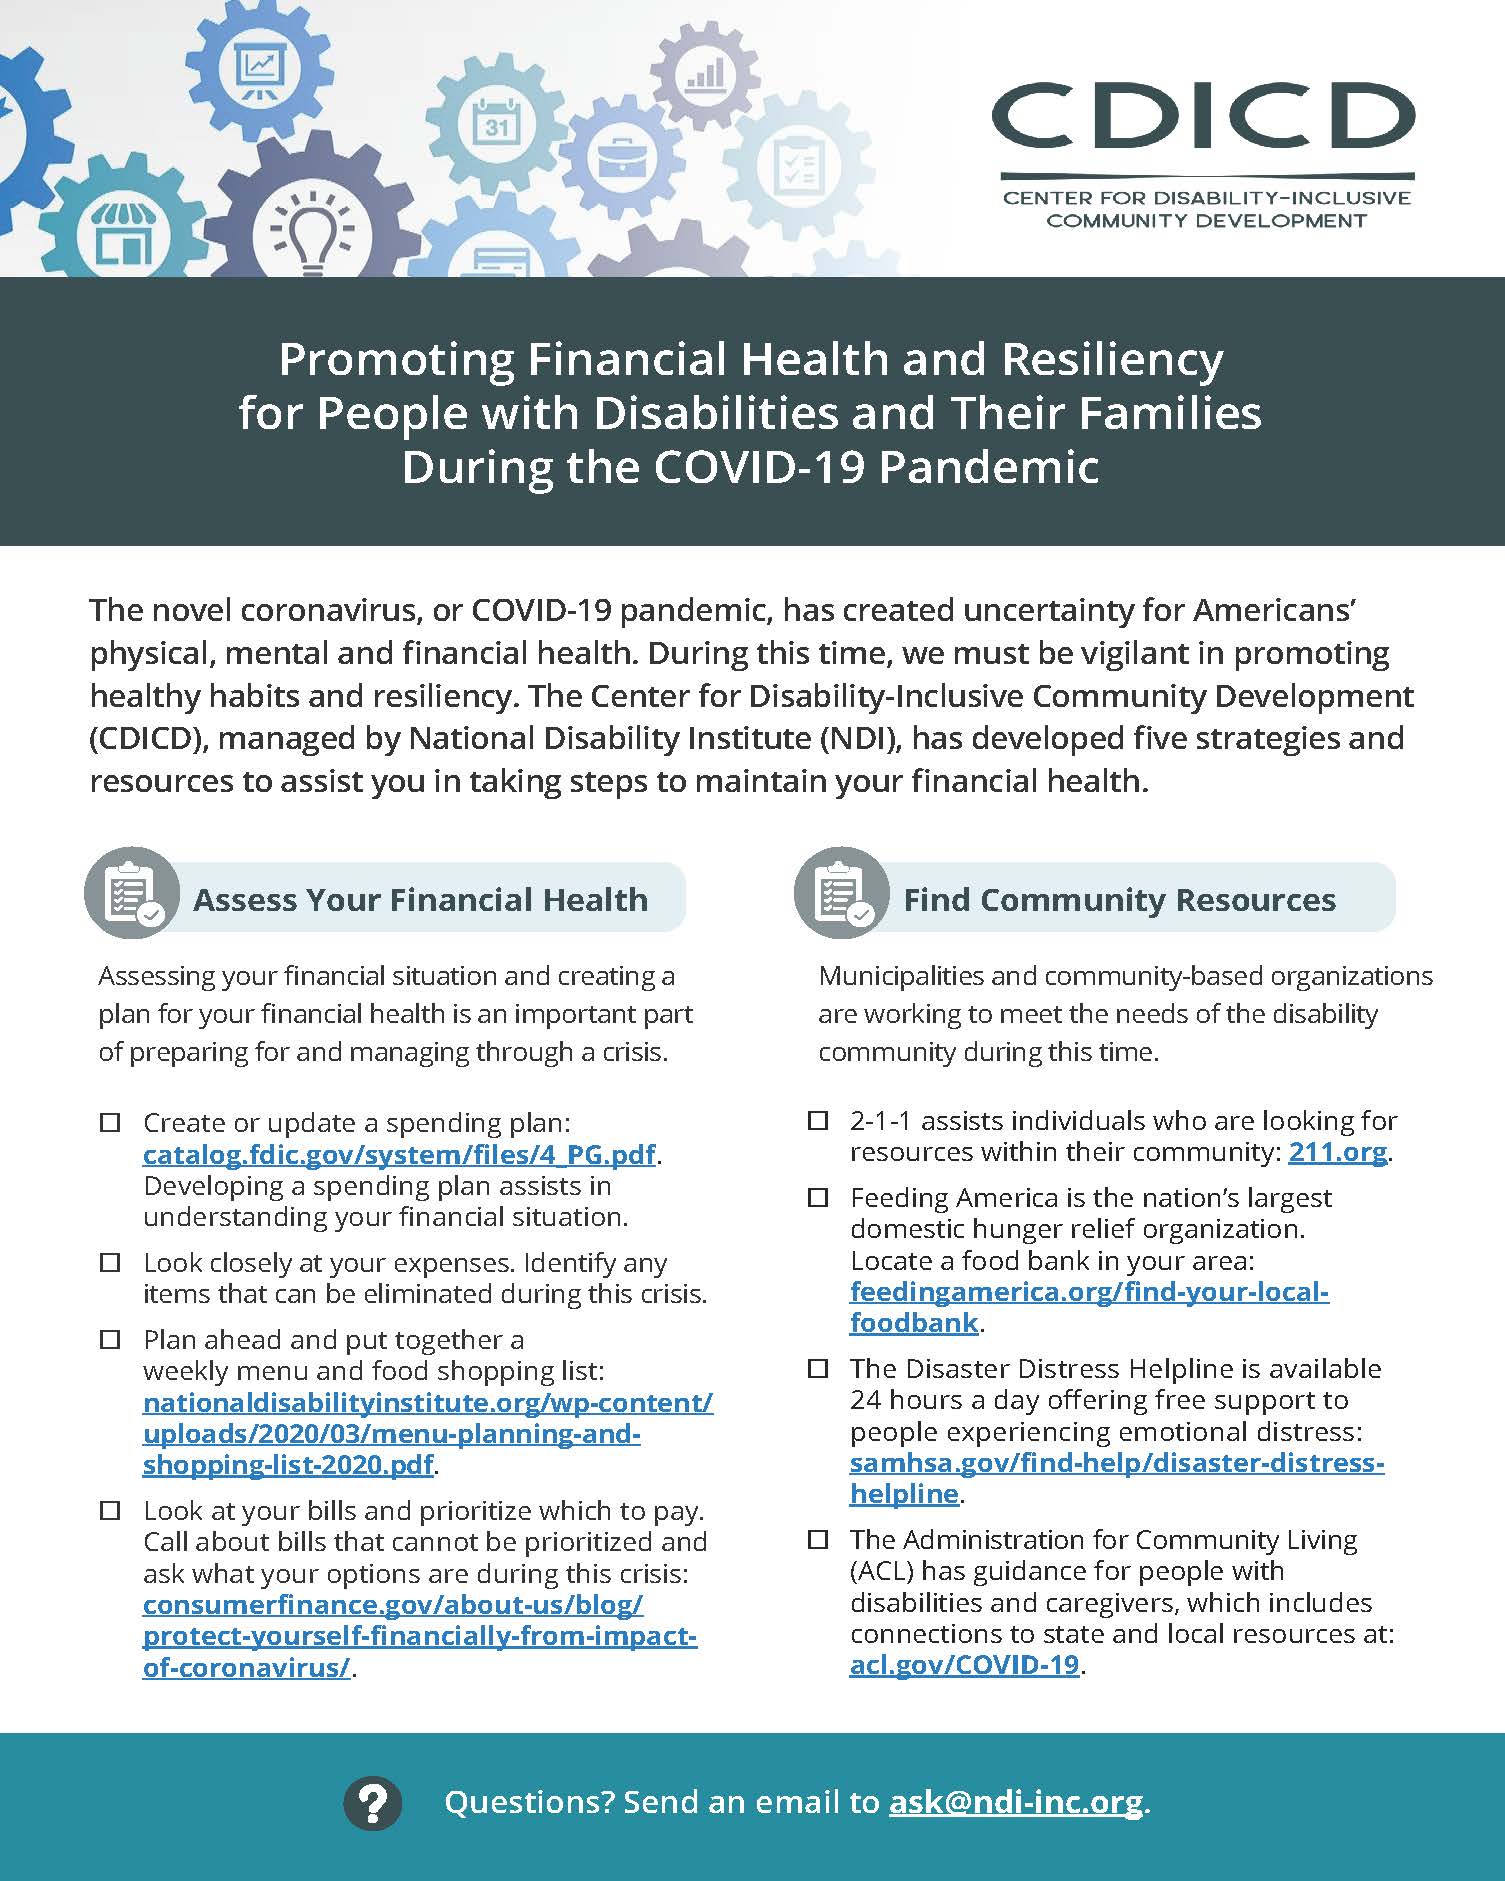 Promoting Financial Health and Resiliency for People with Disabilities and Their Families COVID-19